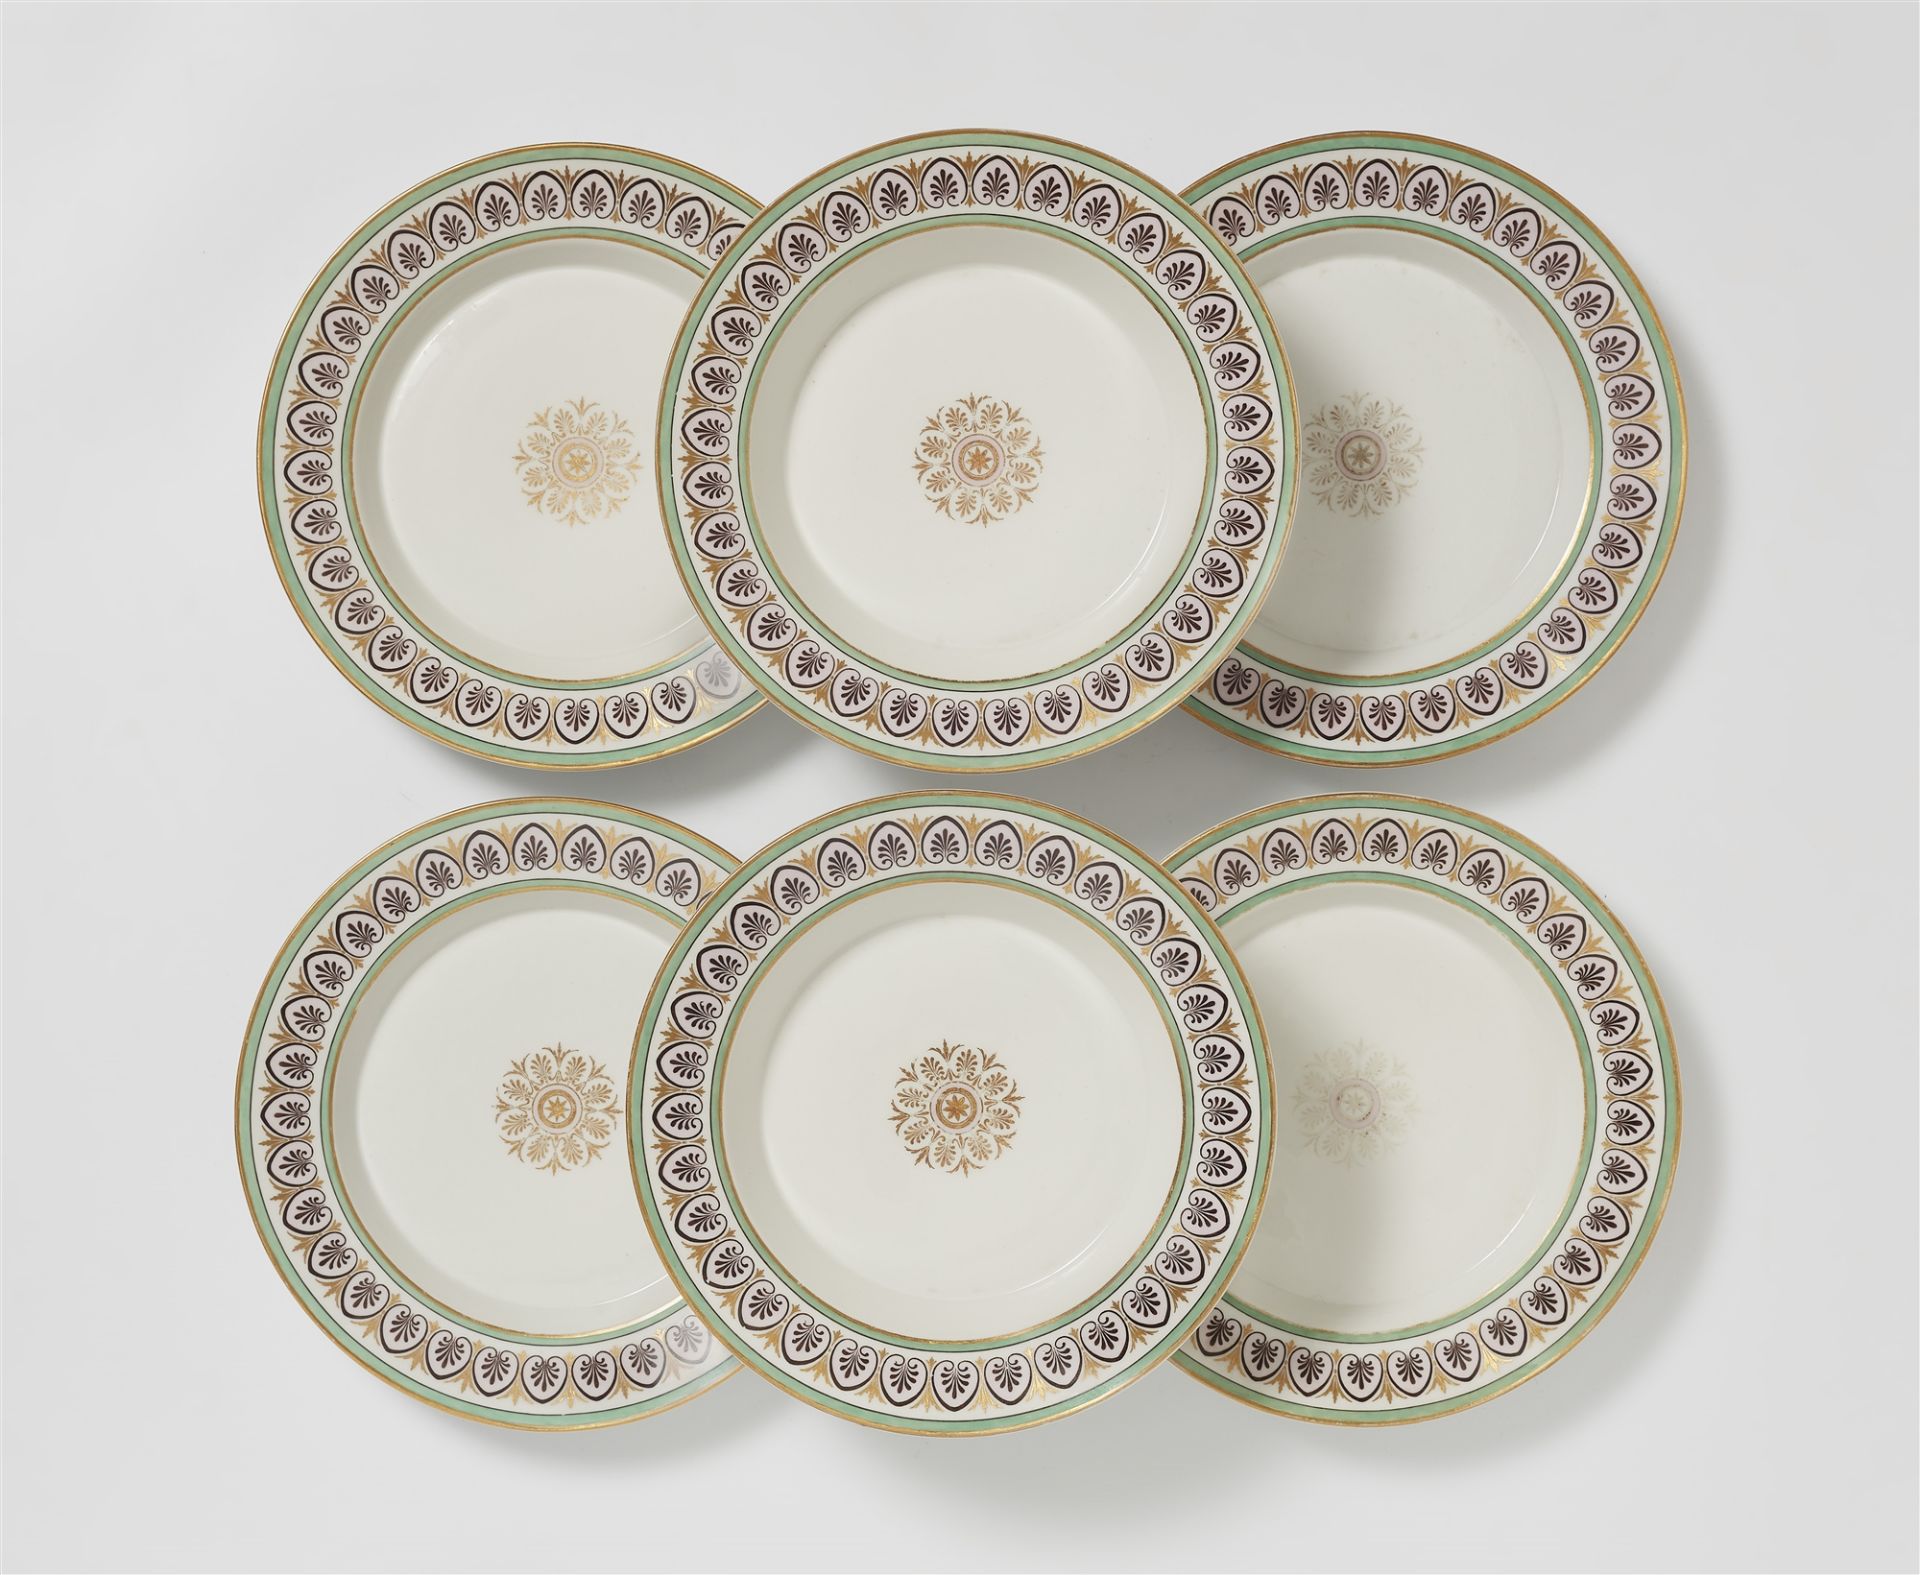 Seven Berlin KPM porcelain items from a Neoclassical service - Image 2 of 2